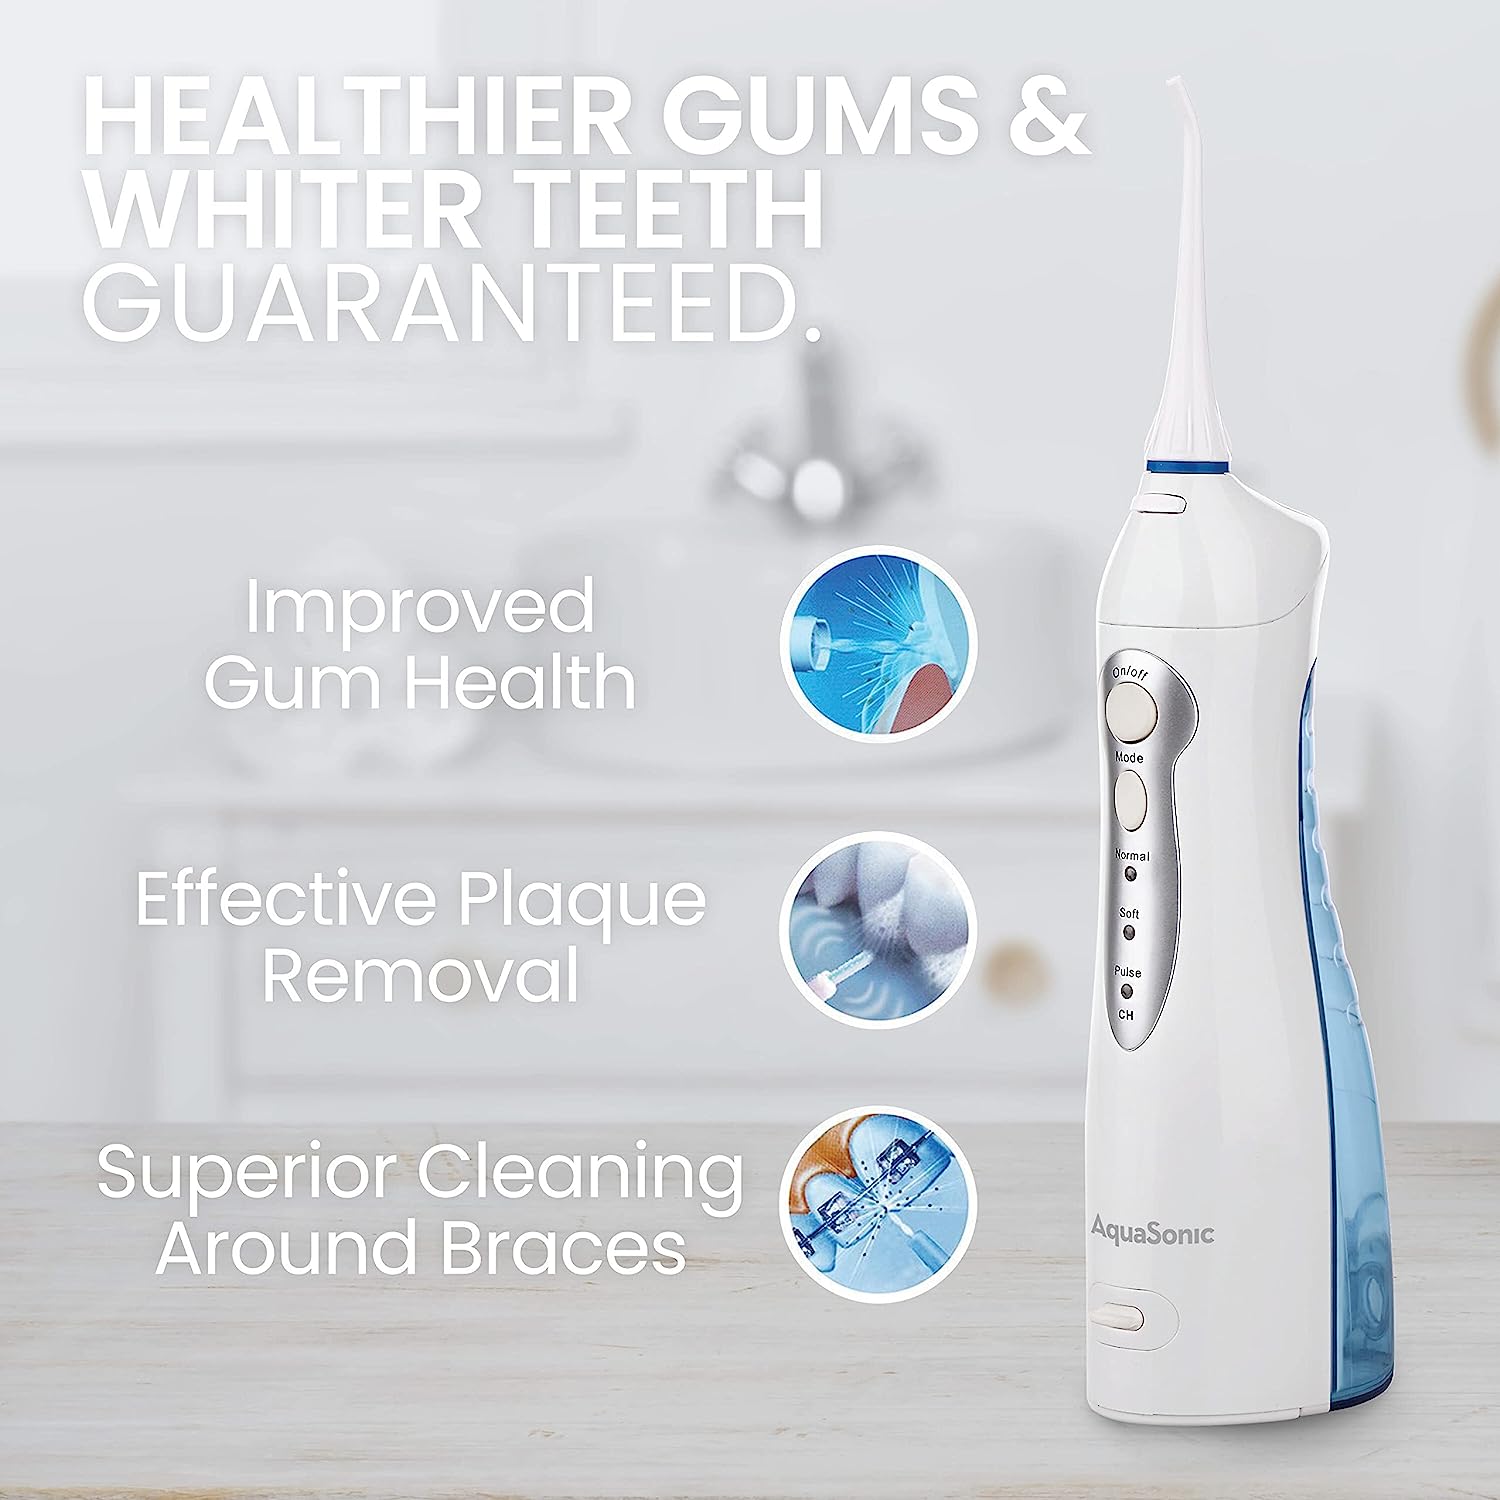 Aquasonic Water Flosser Cordless Rechargeable Oral Irrigator for Kids and Adults, White - image 5 of 6